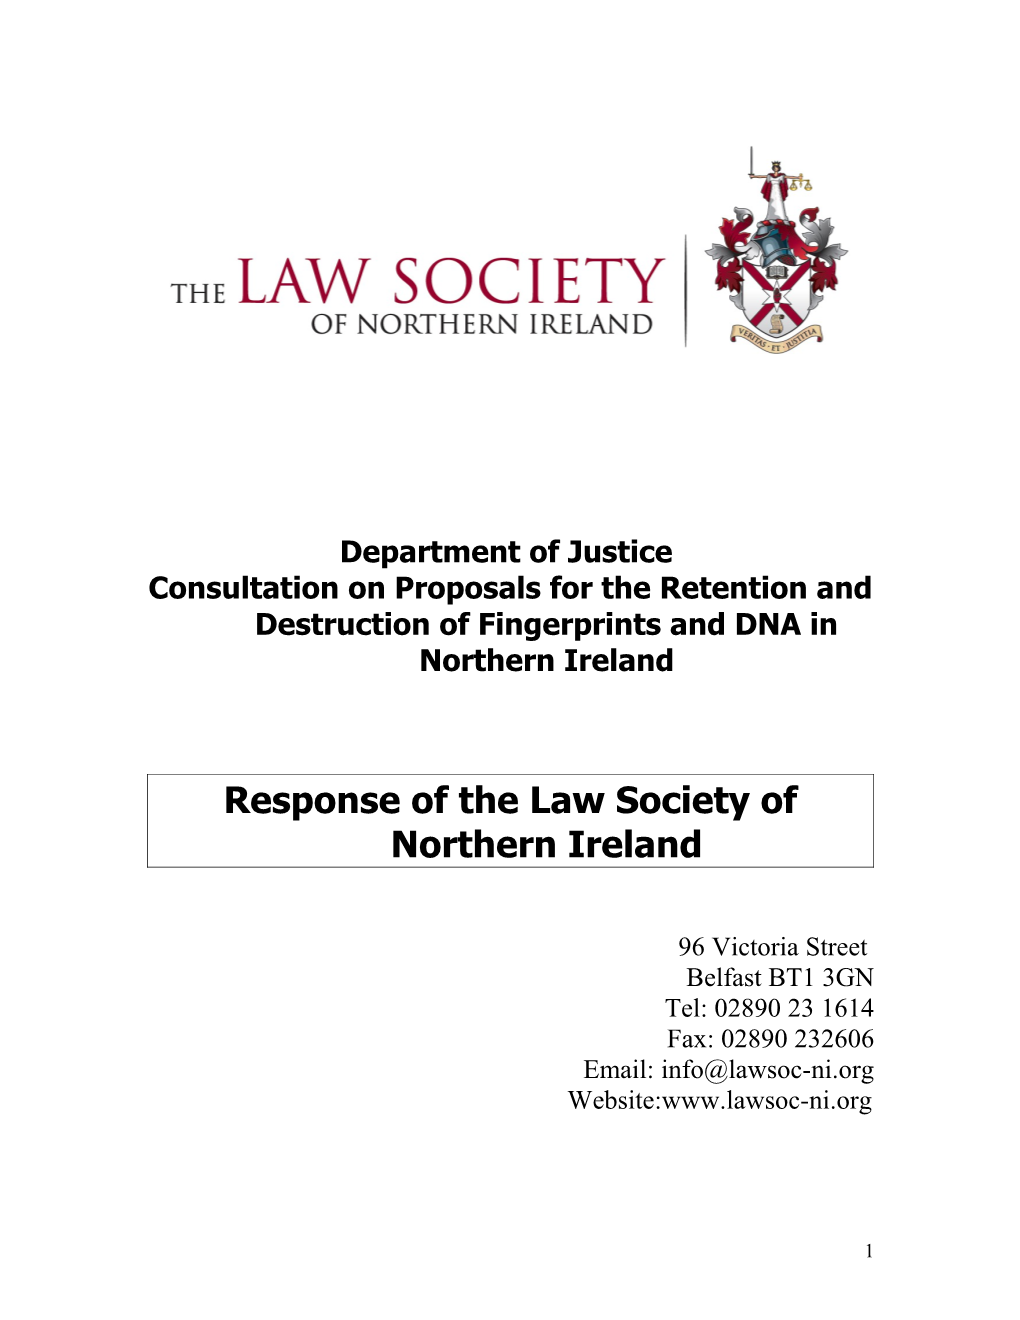 Response of the Law Society of Northern Ireland